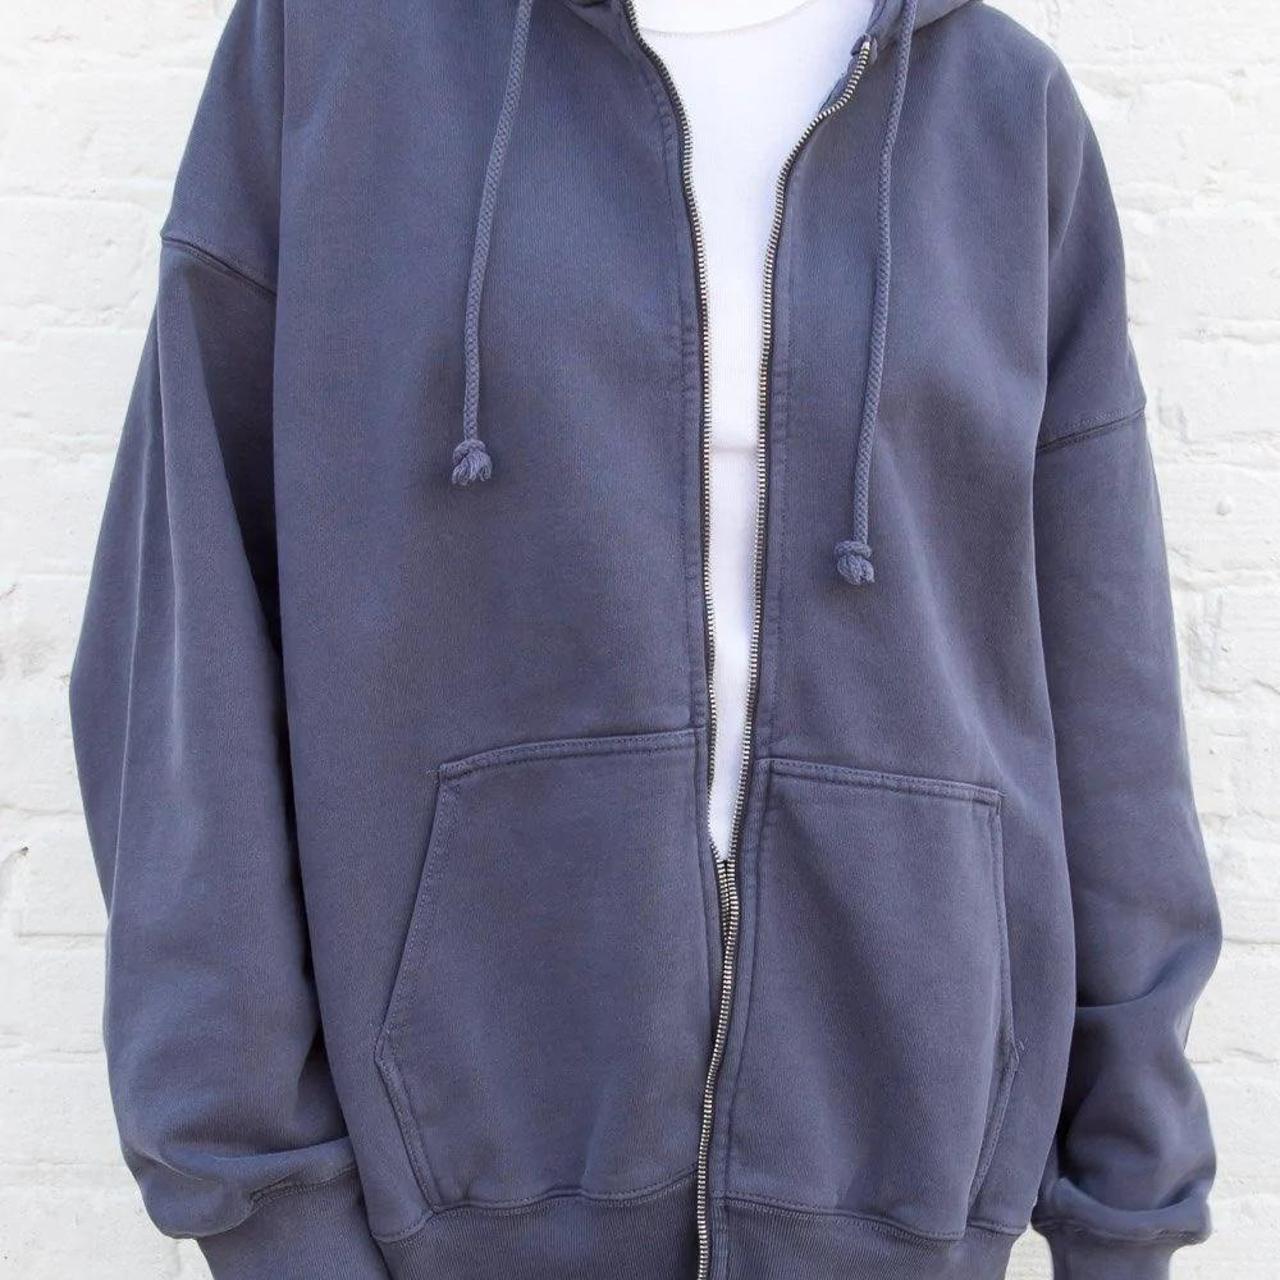 Brandy Melville Hoodie For Sale Canada - Womens Christy Light Grey